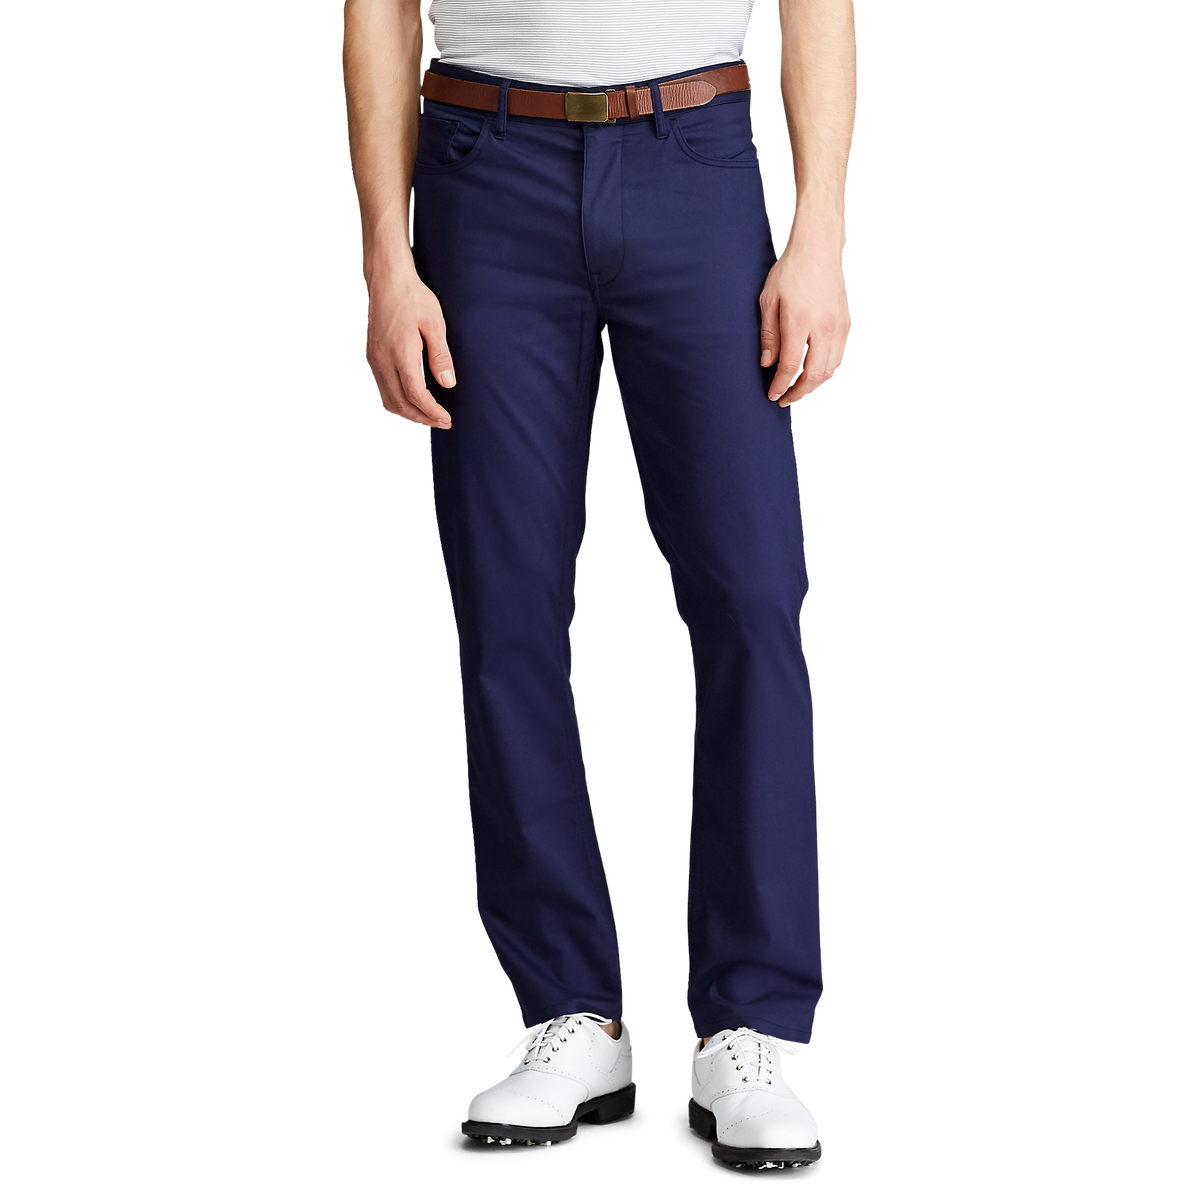 Polo Golf Tailored Fit Chino Golf Pant | PGA TOUR Superstore